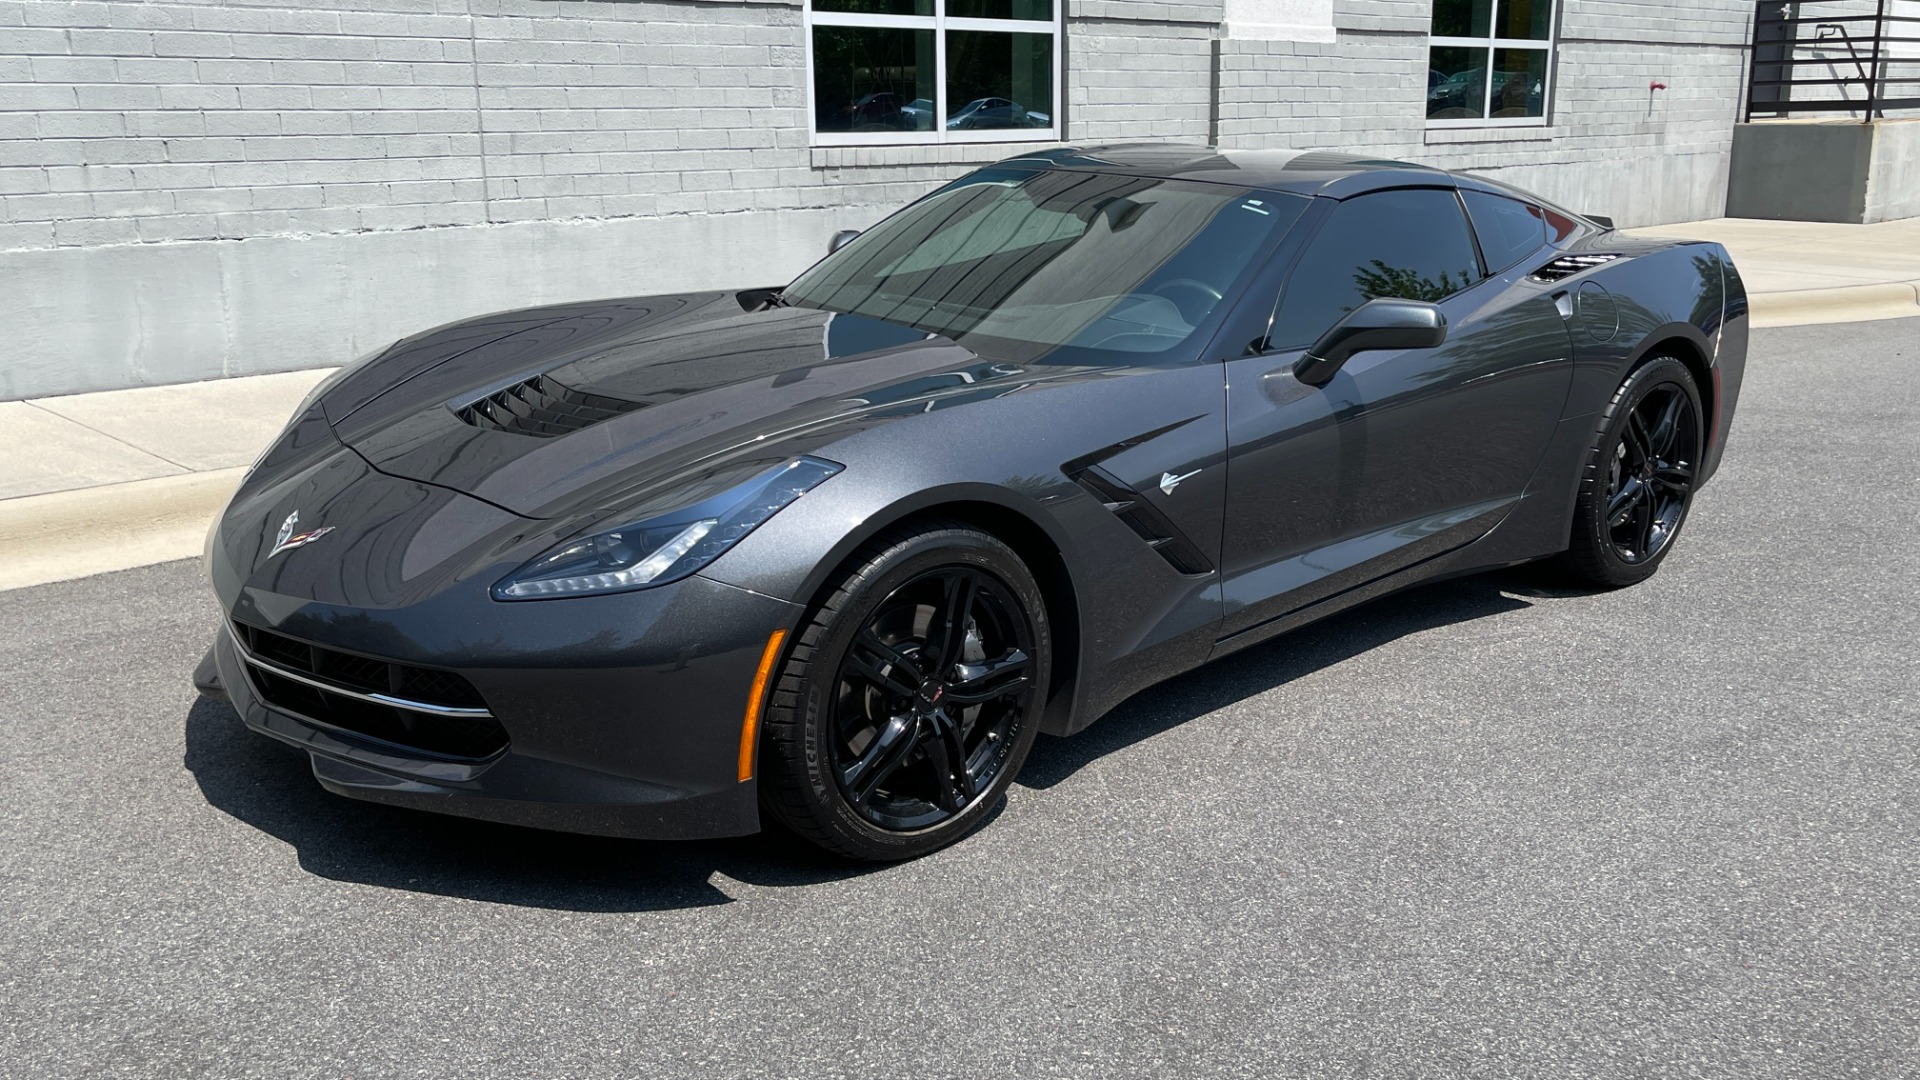 Used 2017 Chevrolet Corvette 1LT / 8SPD AUTO / 6.2L V8 / REMOTE START / PADDLE SHIFTERS for sale $52,995 at Formula Imports in Charlotte NC 28227 18